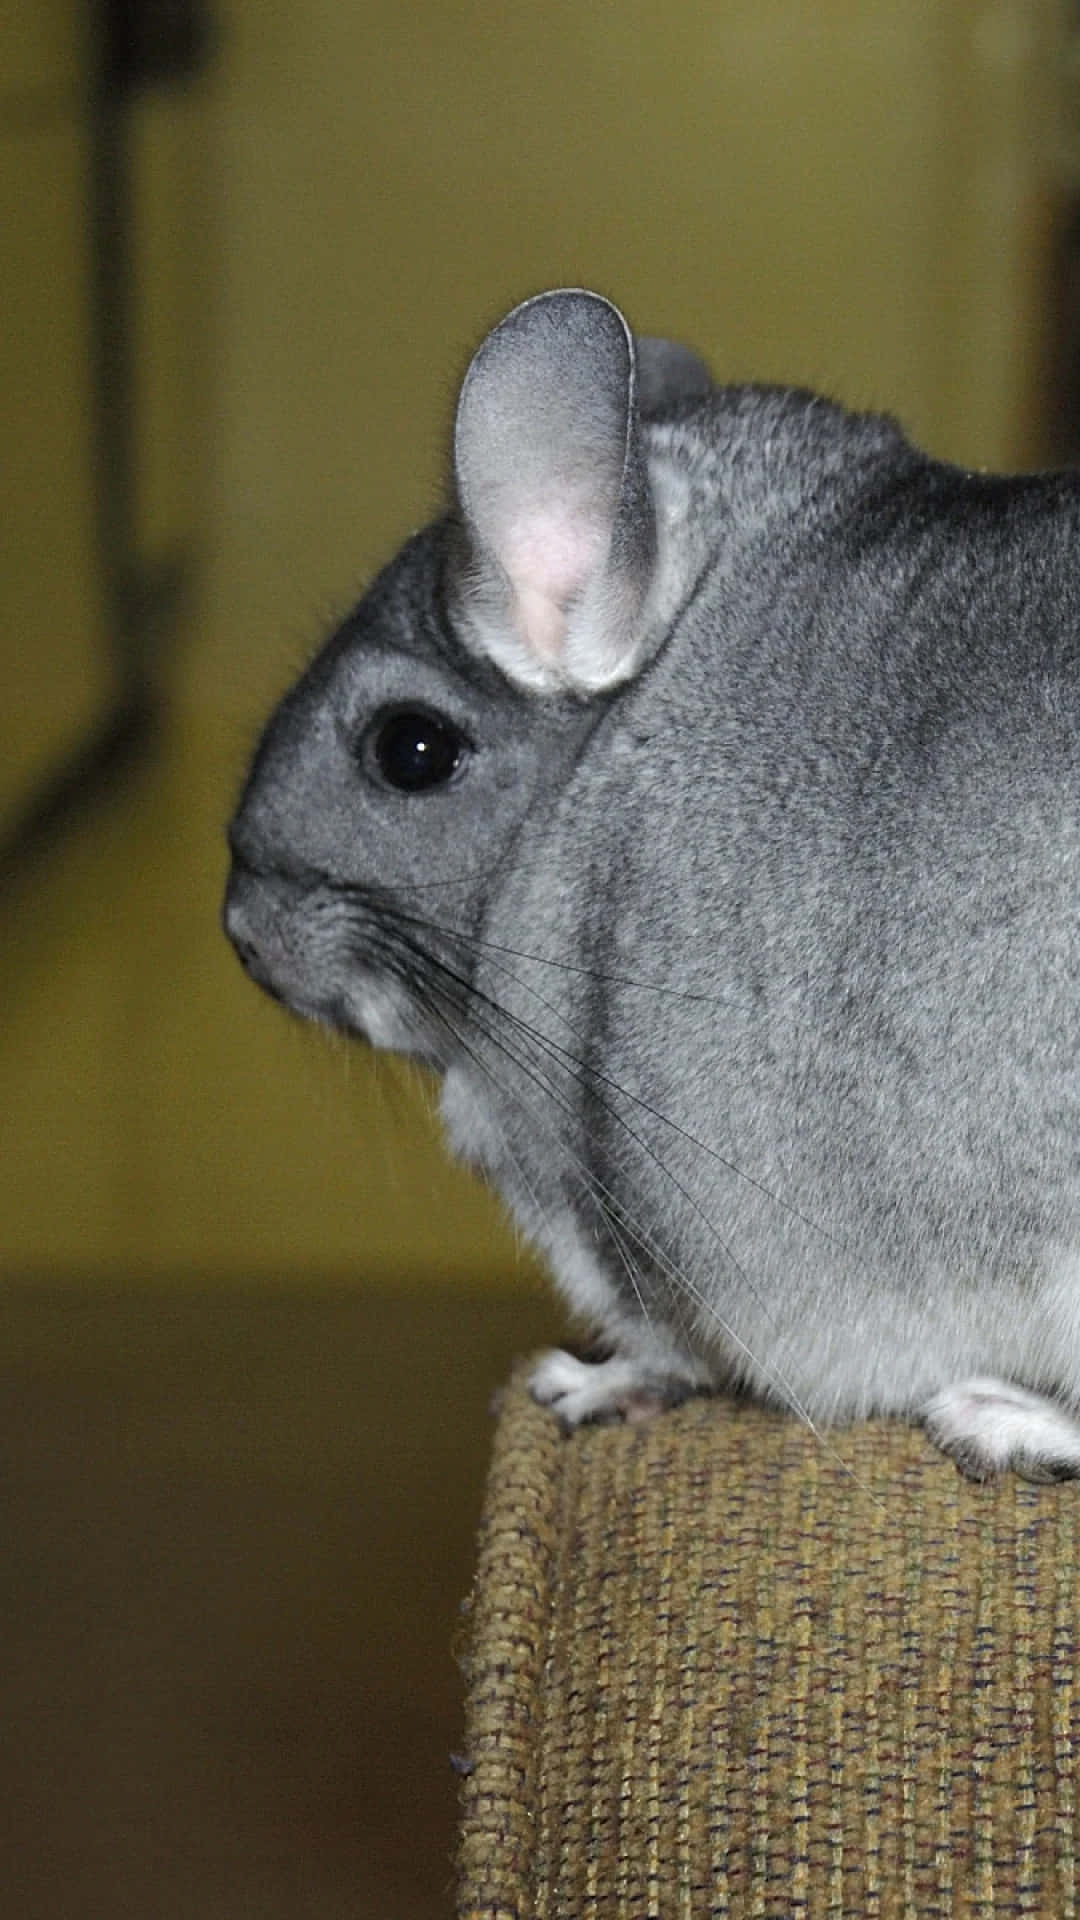 Cute and Fluffy - Look at this adorable Chinchilla!